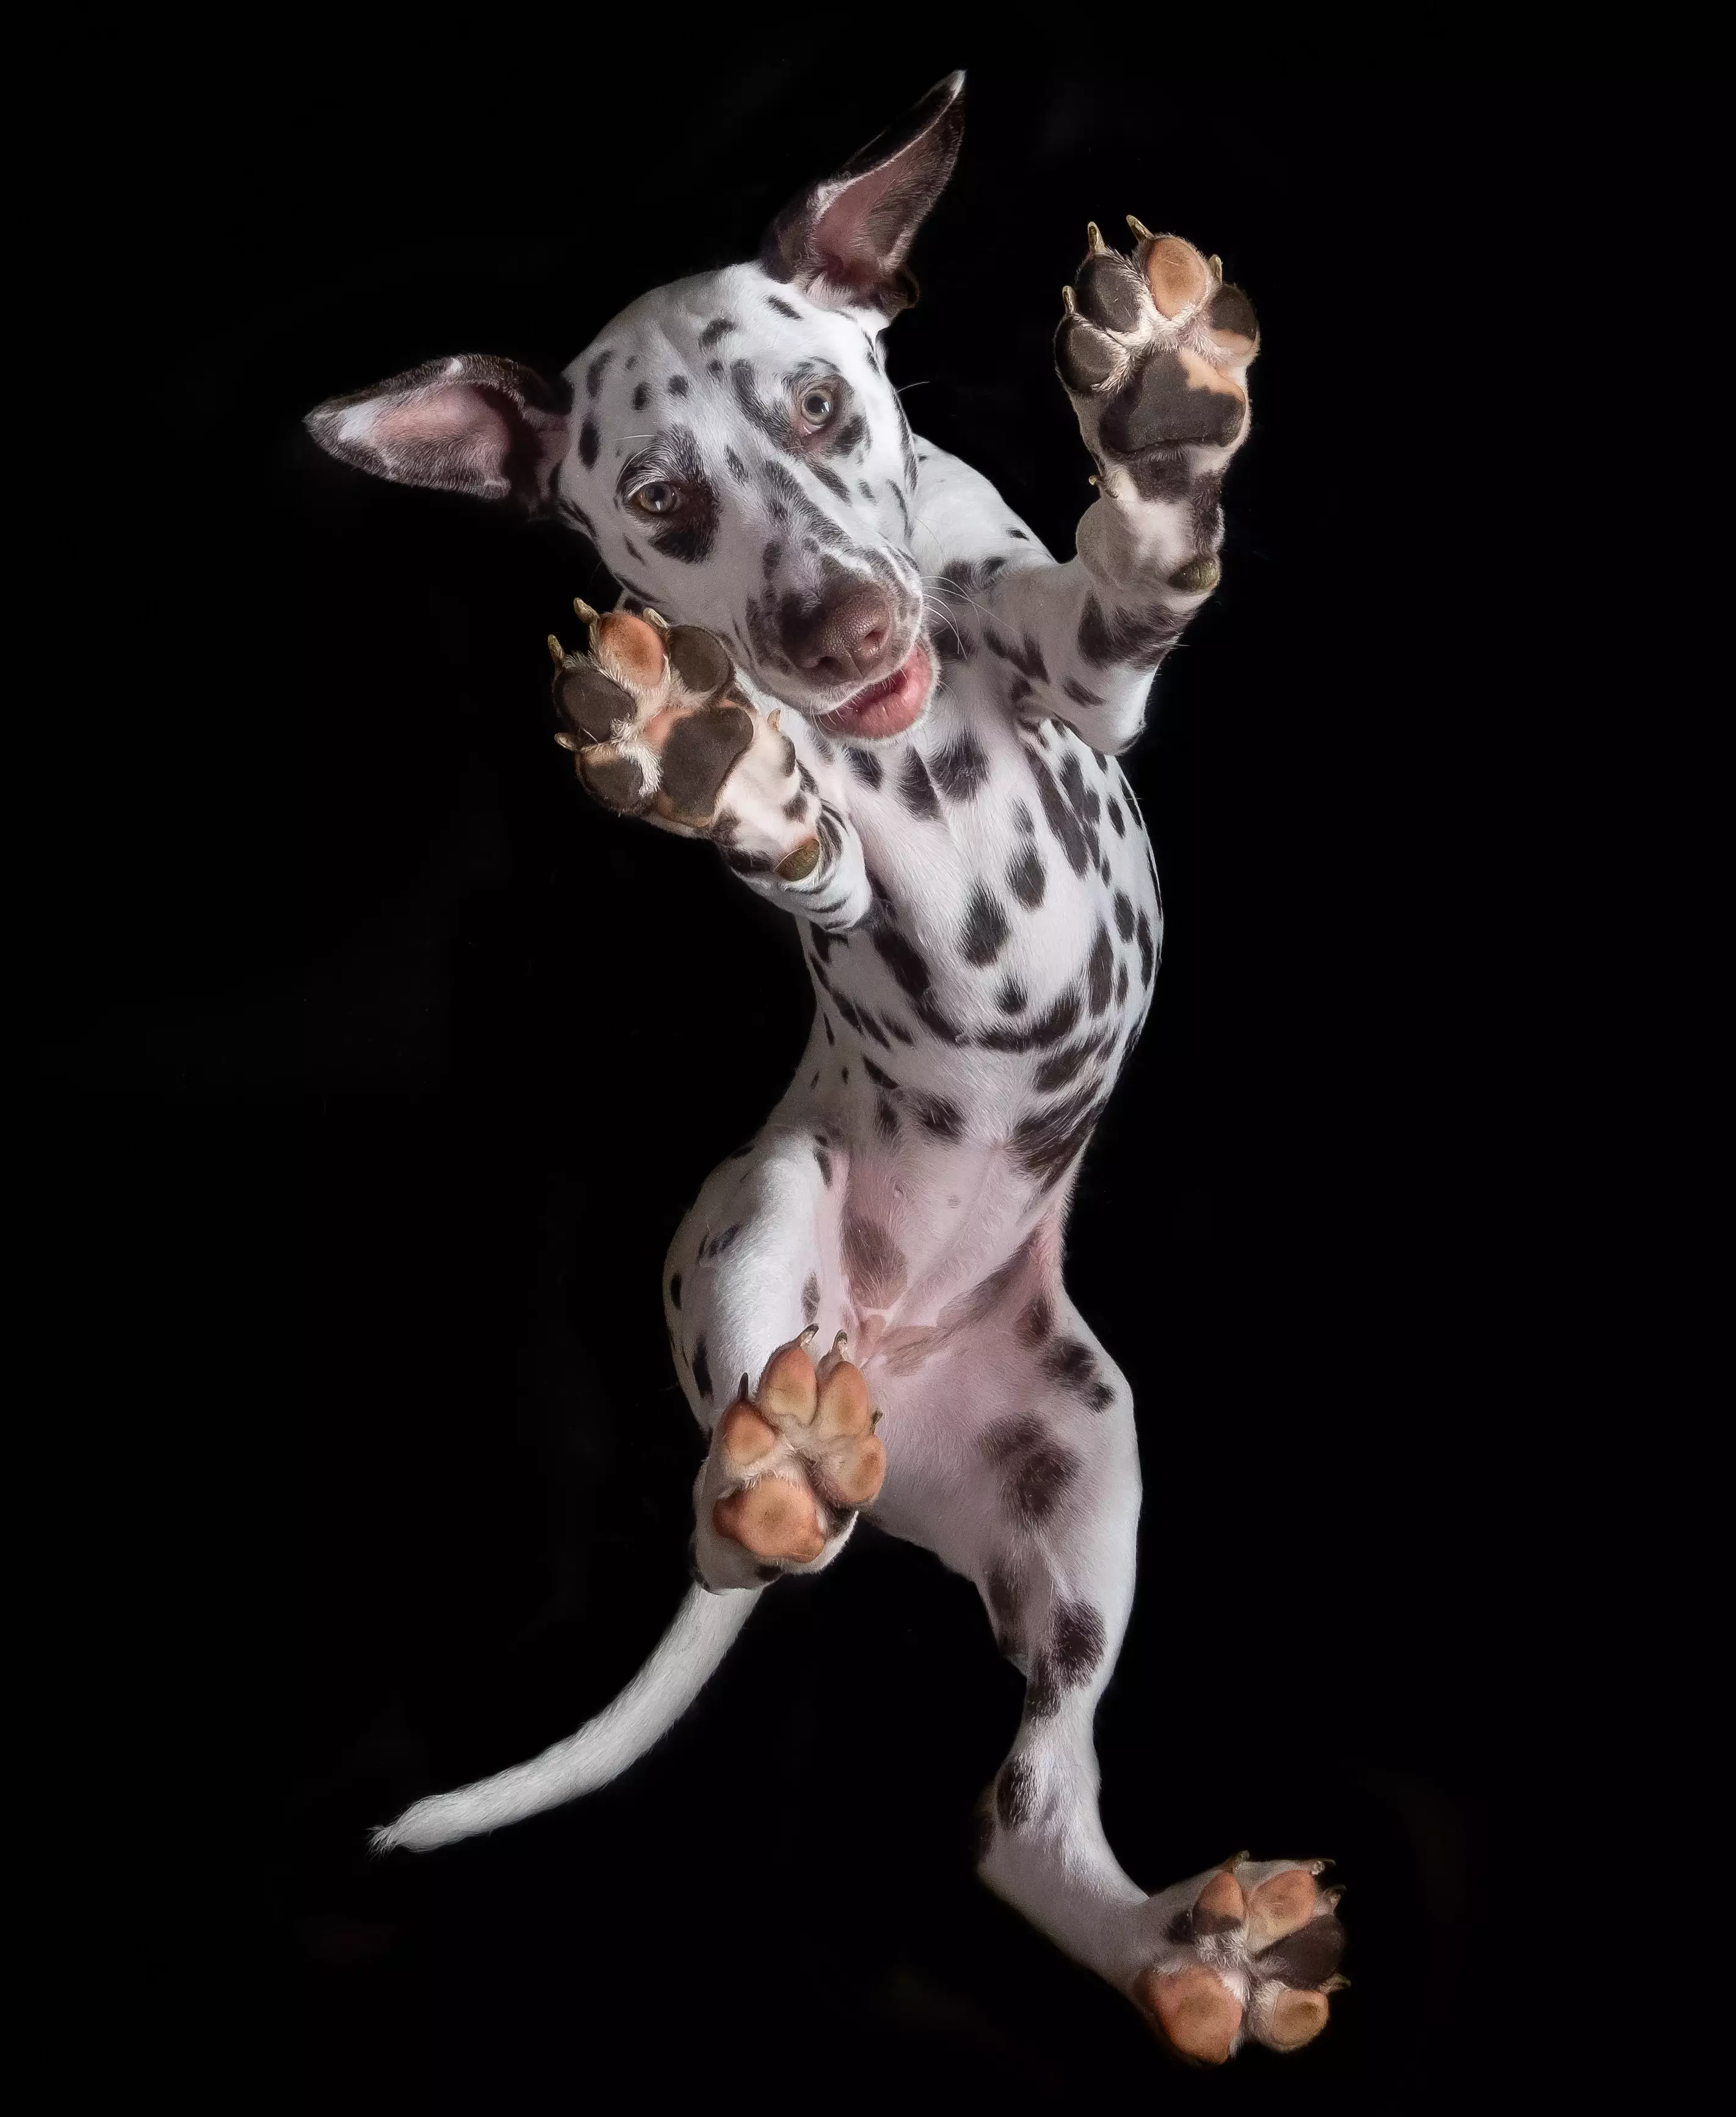 Colin says Dalmatians have such long legs they find it harder to stand on the glass and look down. (